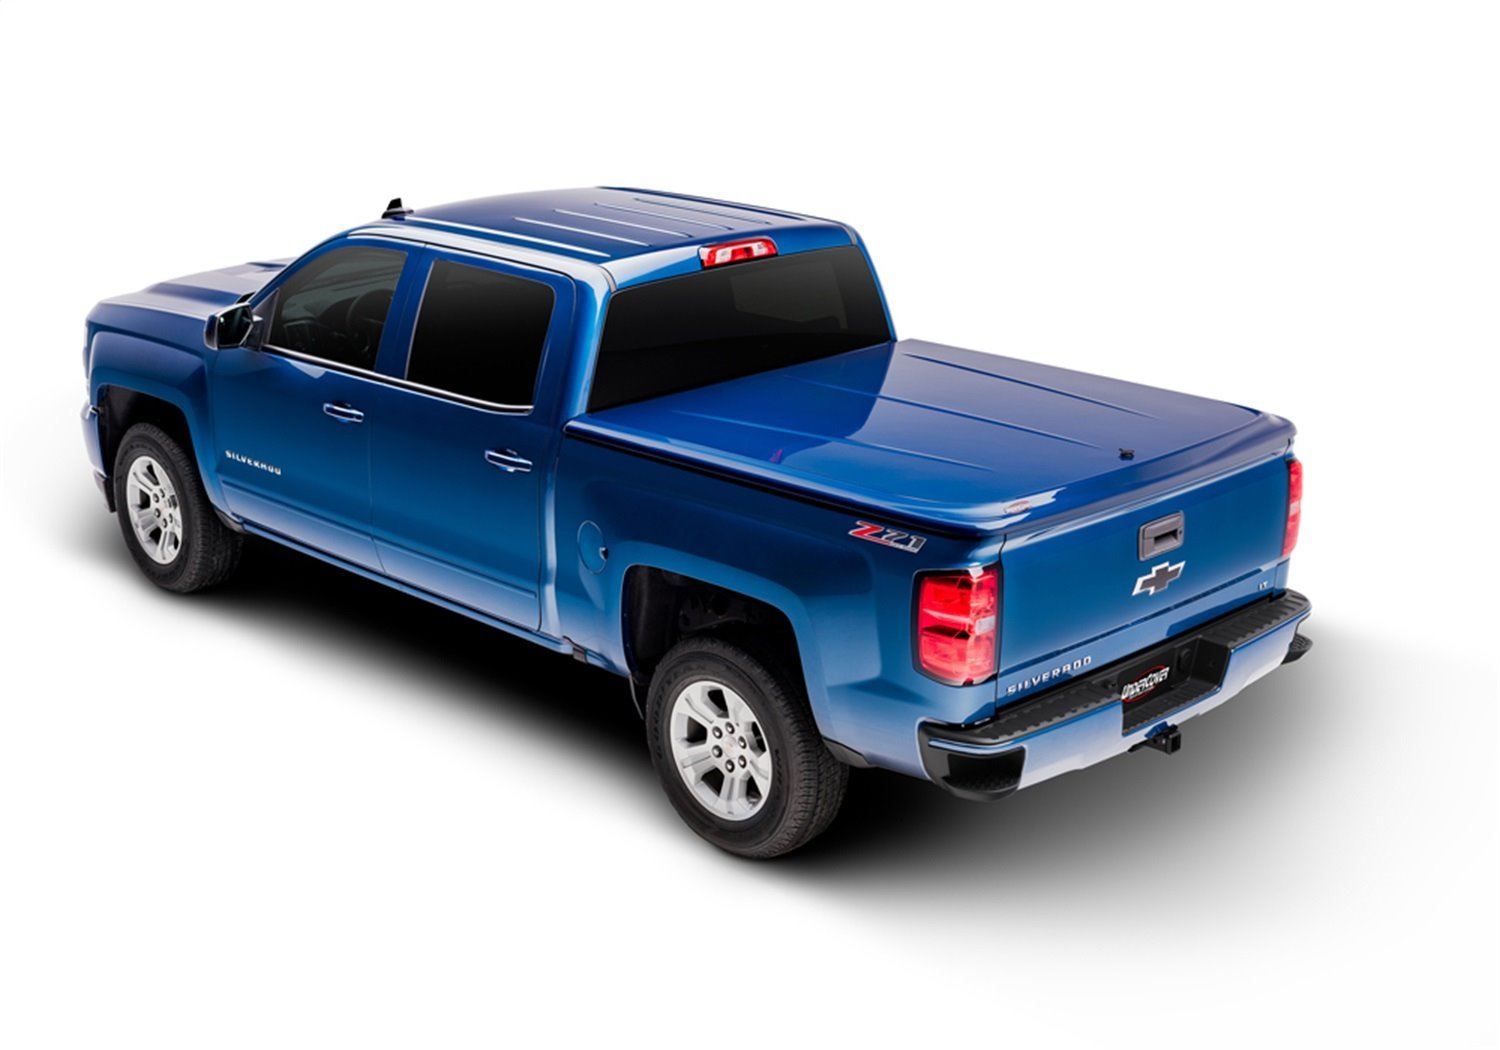 UC4116L-1D6 LUX Hard Non-Folding Cover, 2014-2021 Toyota Tundra 5'6" Bed CrewMax w/o Trail Edition Storage Boxes, 1D6 Silver Sky